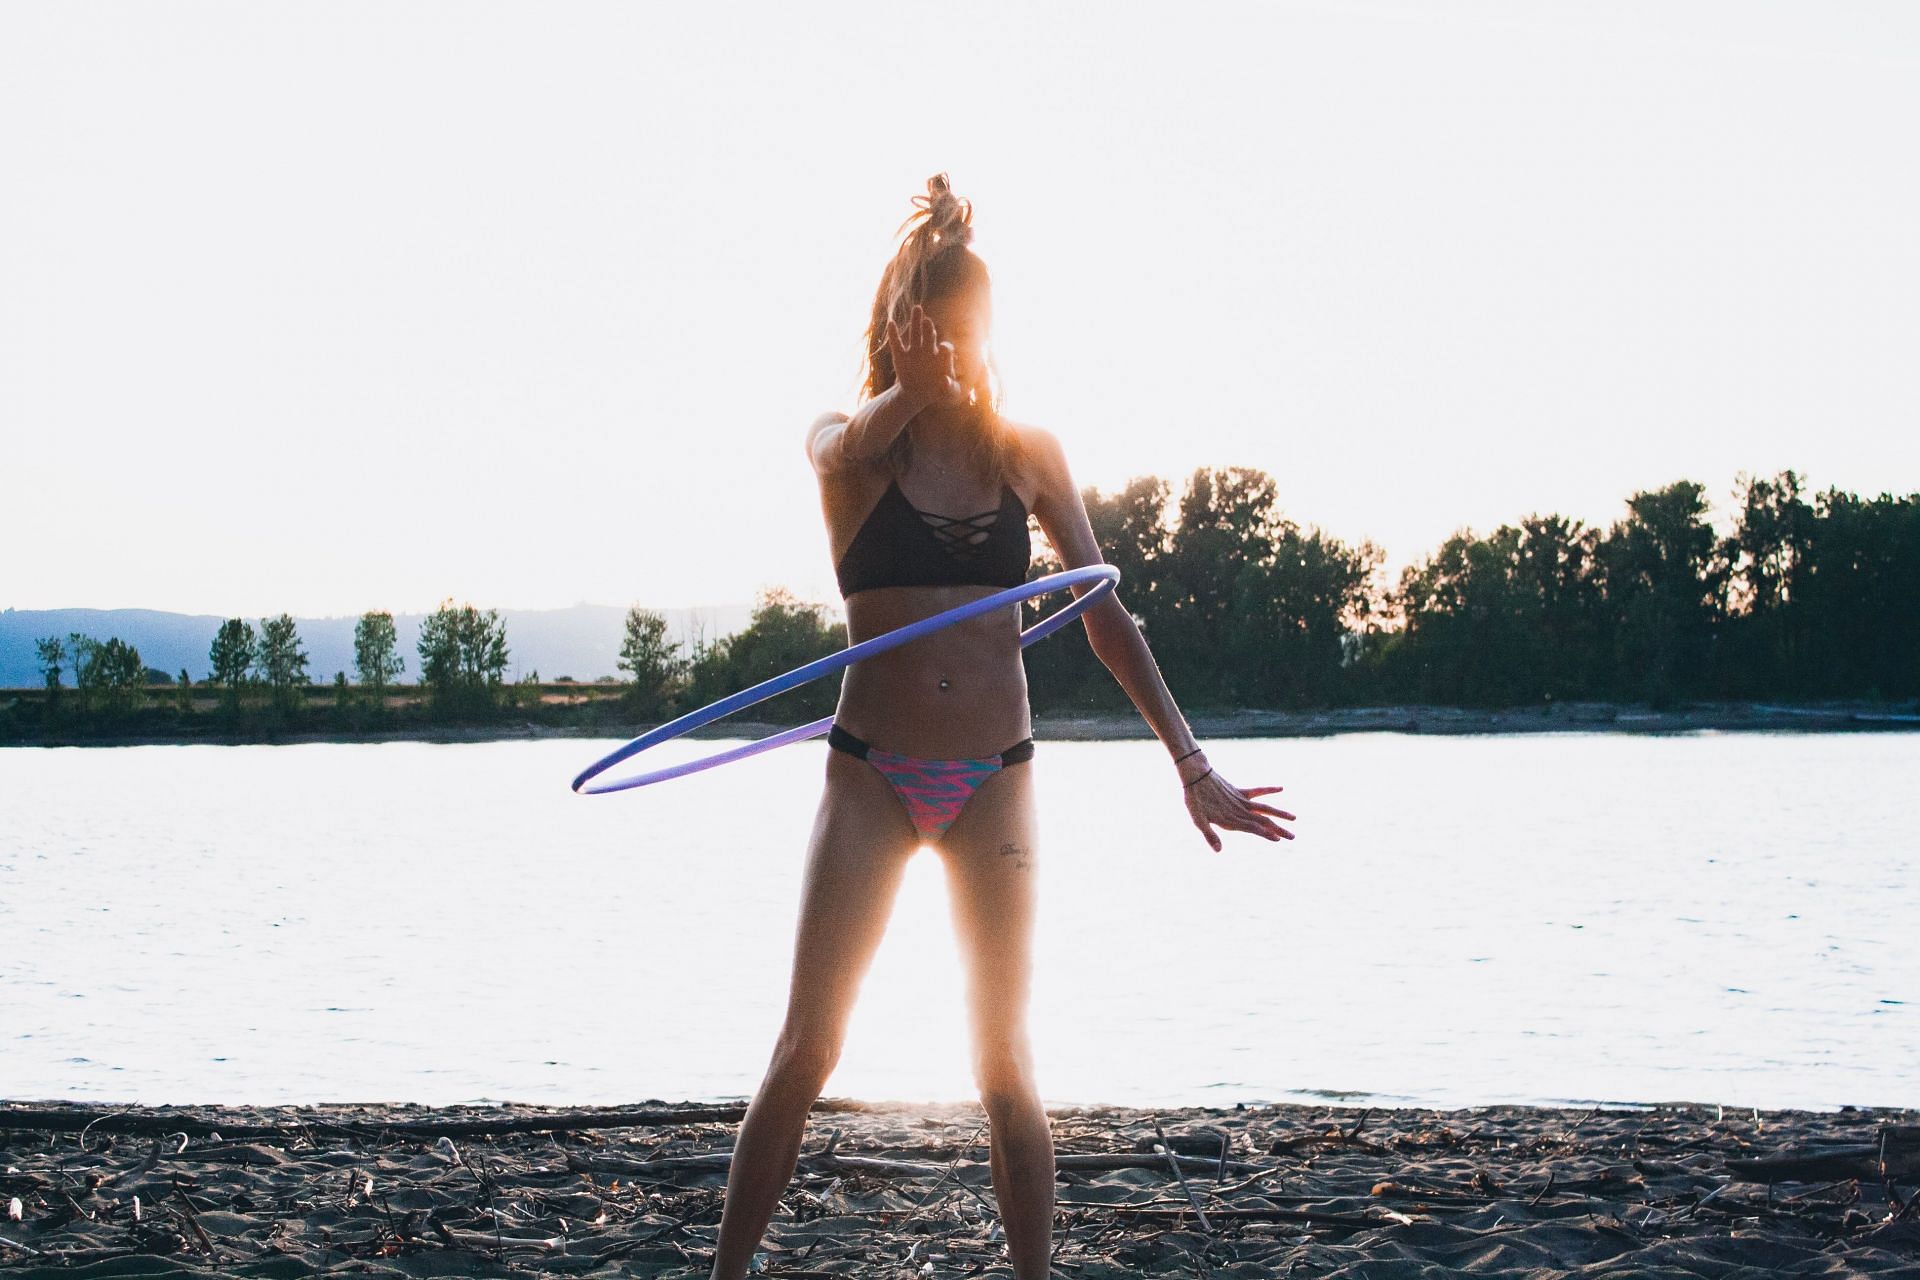 Hula hoop exercises are the best if you want to have fun while working out. (Image via Unsplash/ David Herron)